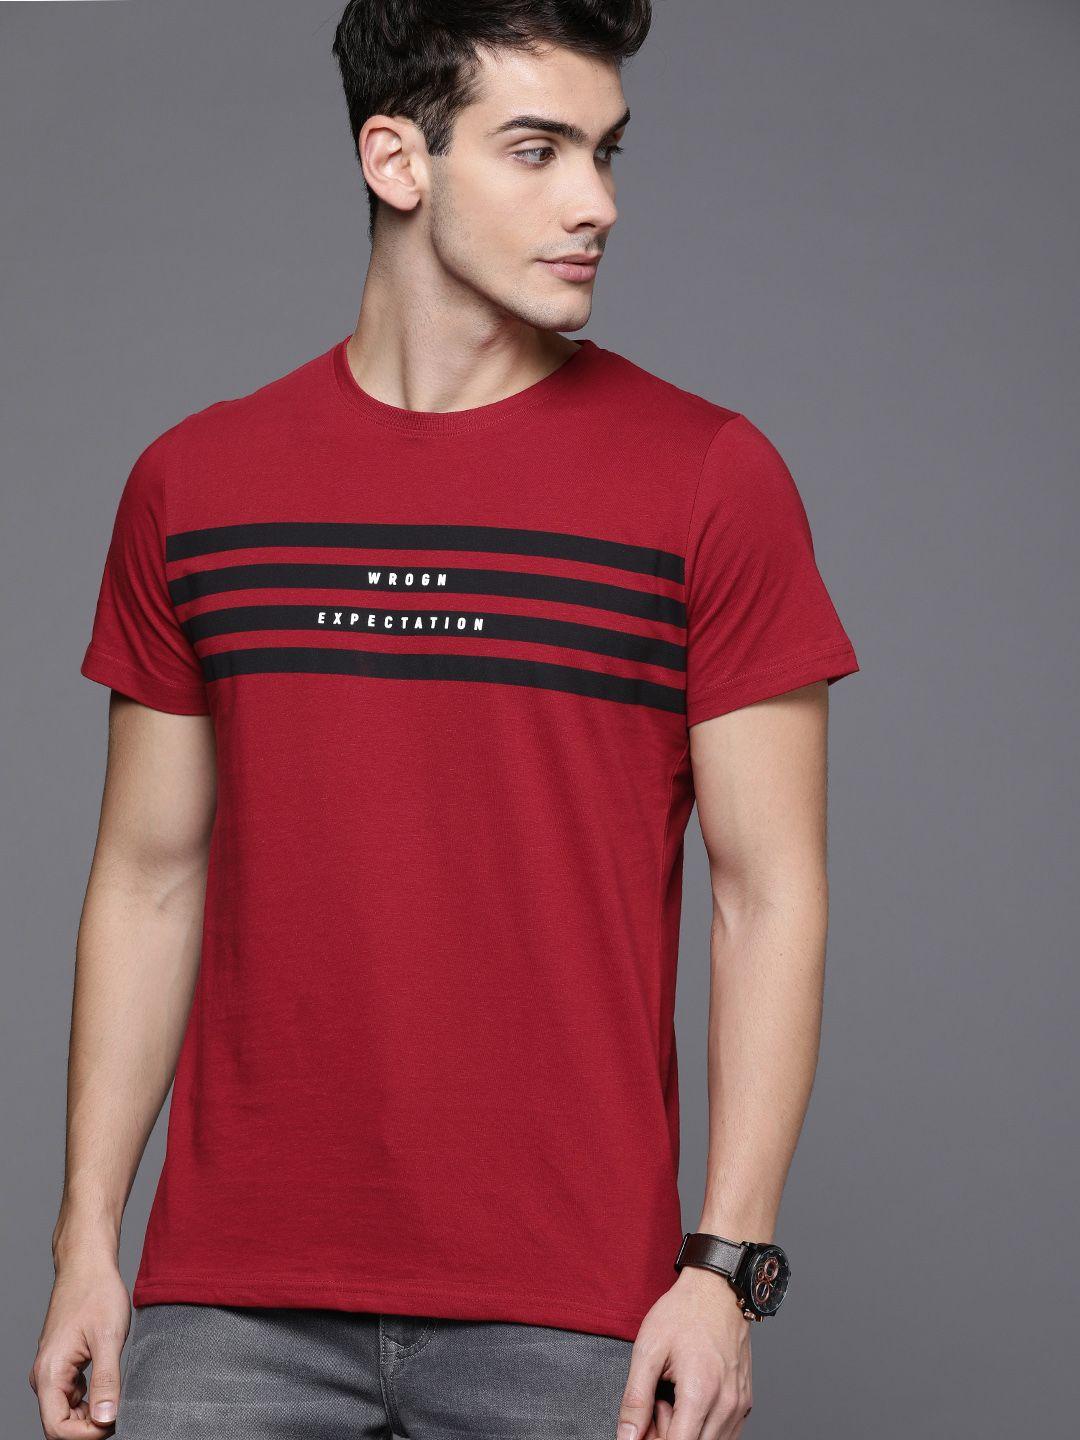 wrogn men red  black striped slim fit round neck pure cotton t-shirt with printed detail